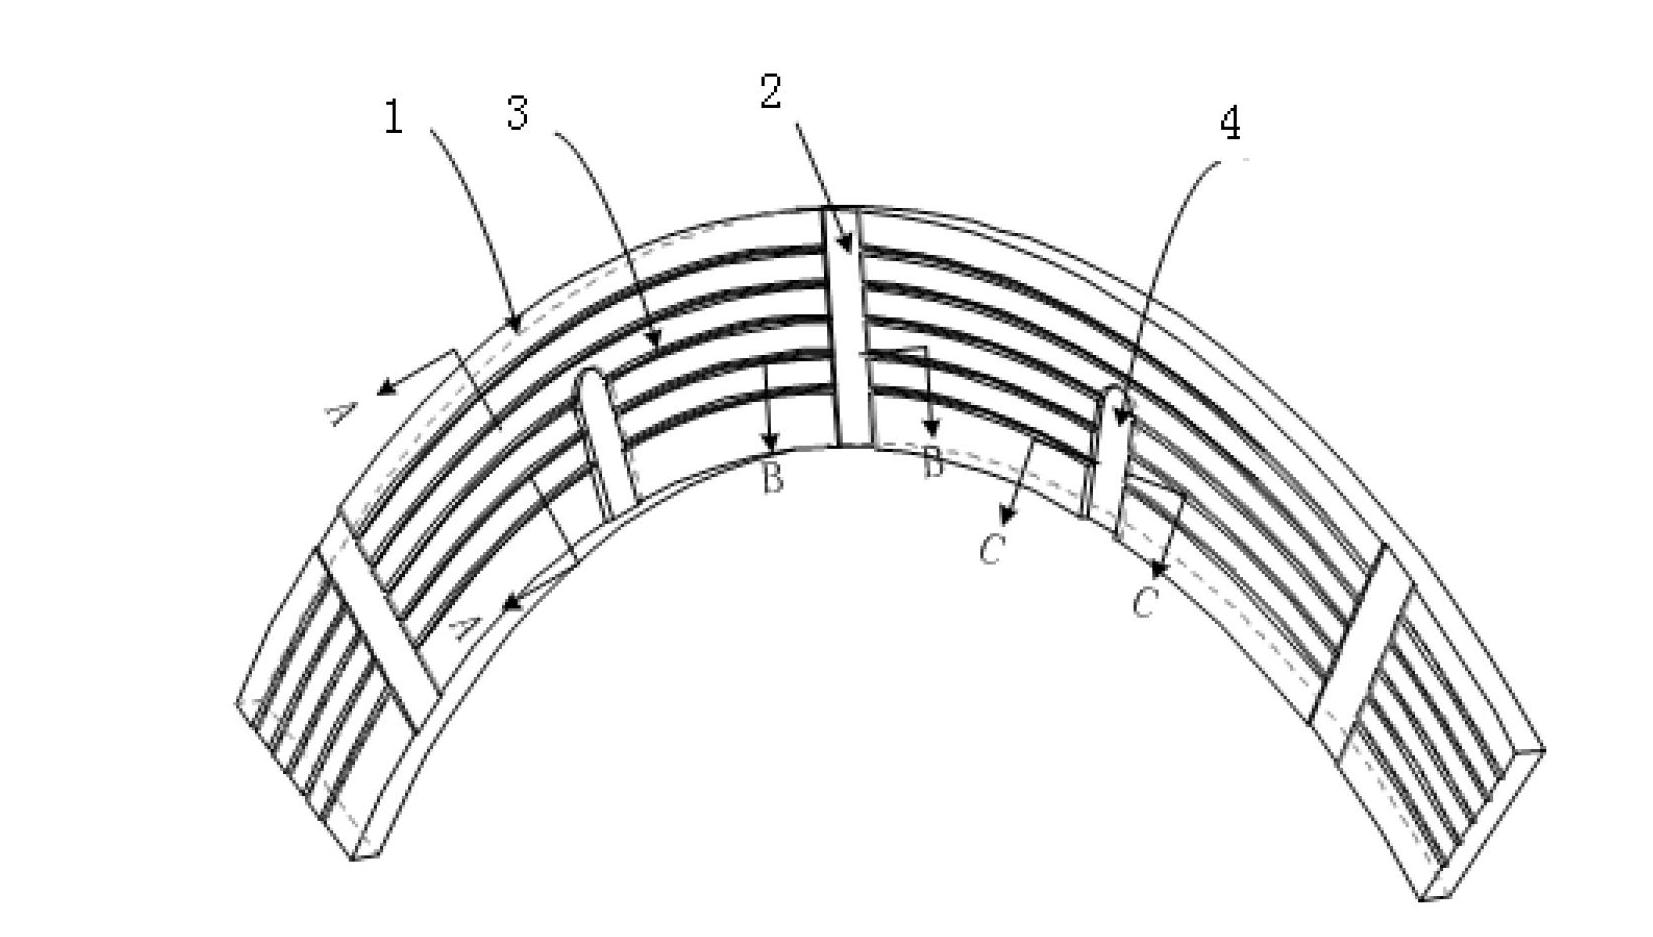 High/low-speed groove clutch friction plate